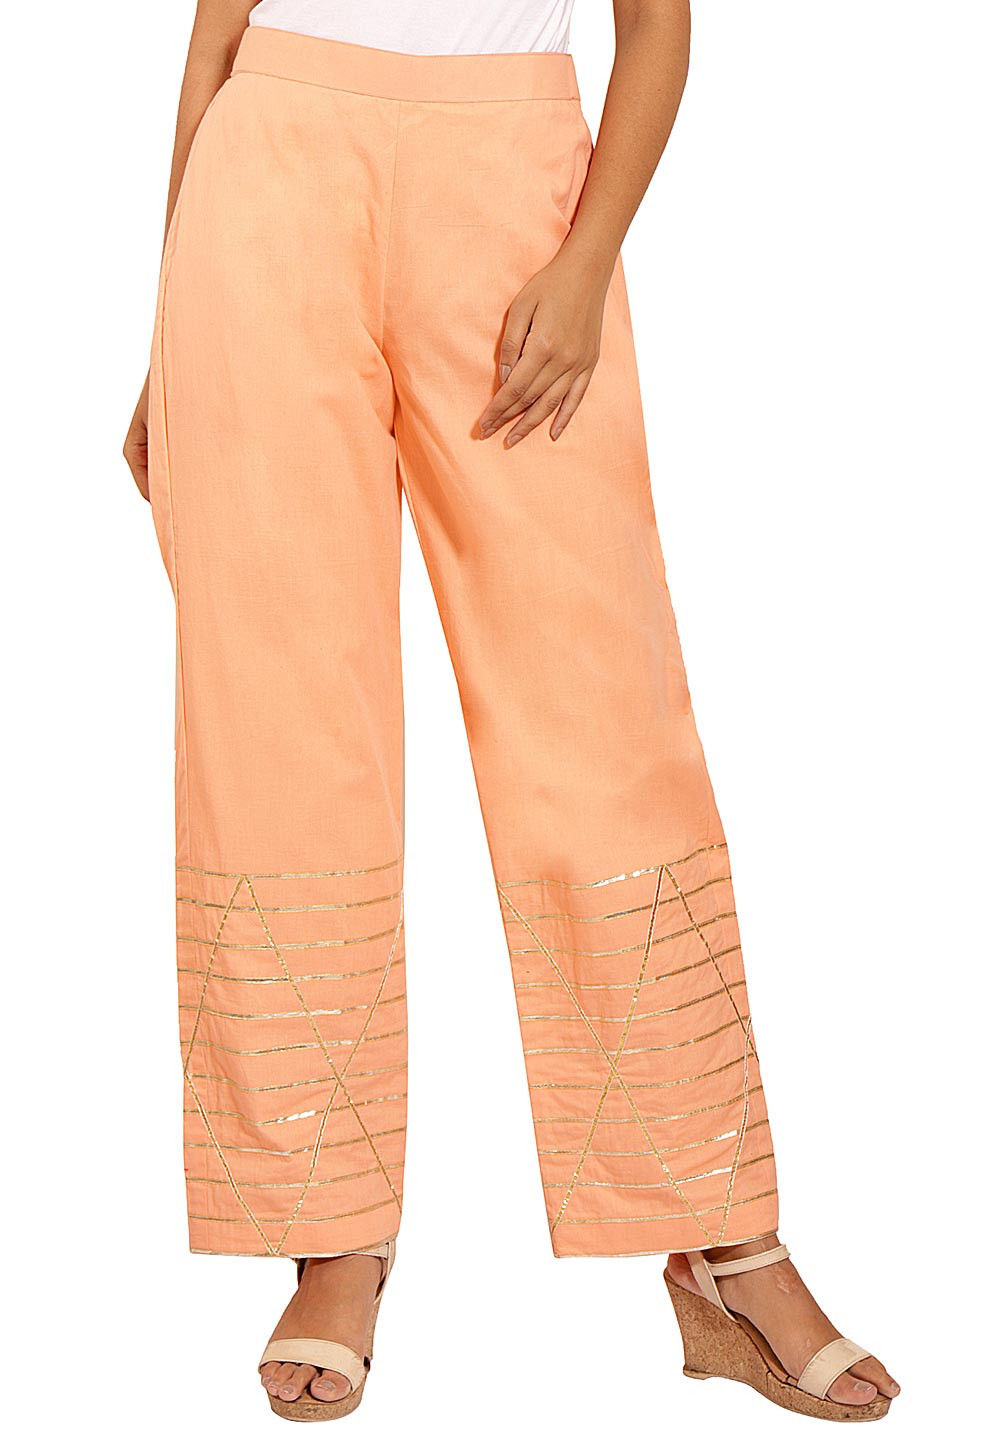 Women's Tie-Dyed Wide-Leg Pants Created for Macy's XL antique peach color |  eBay